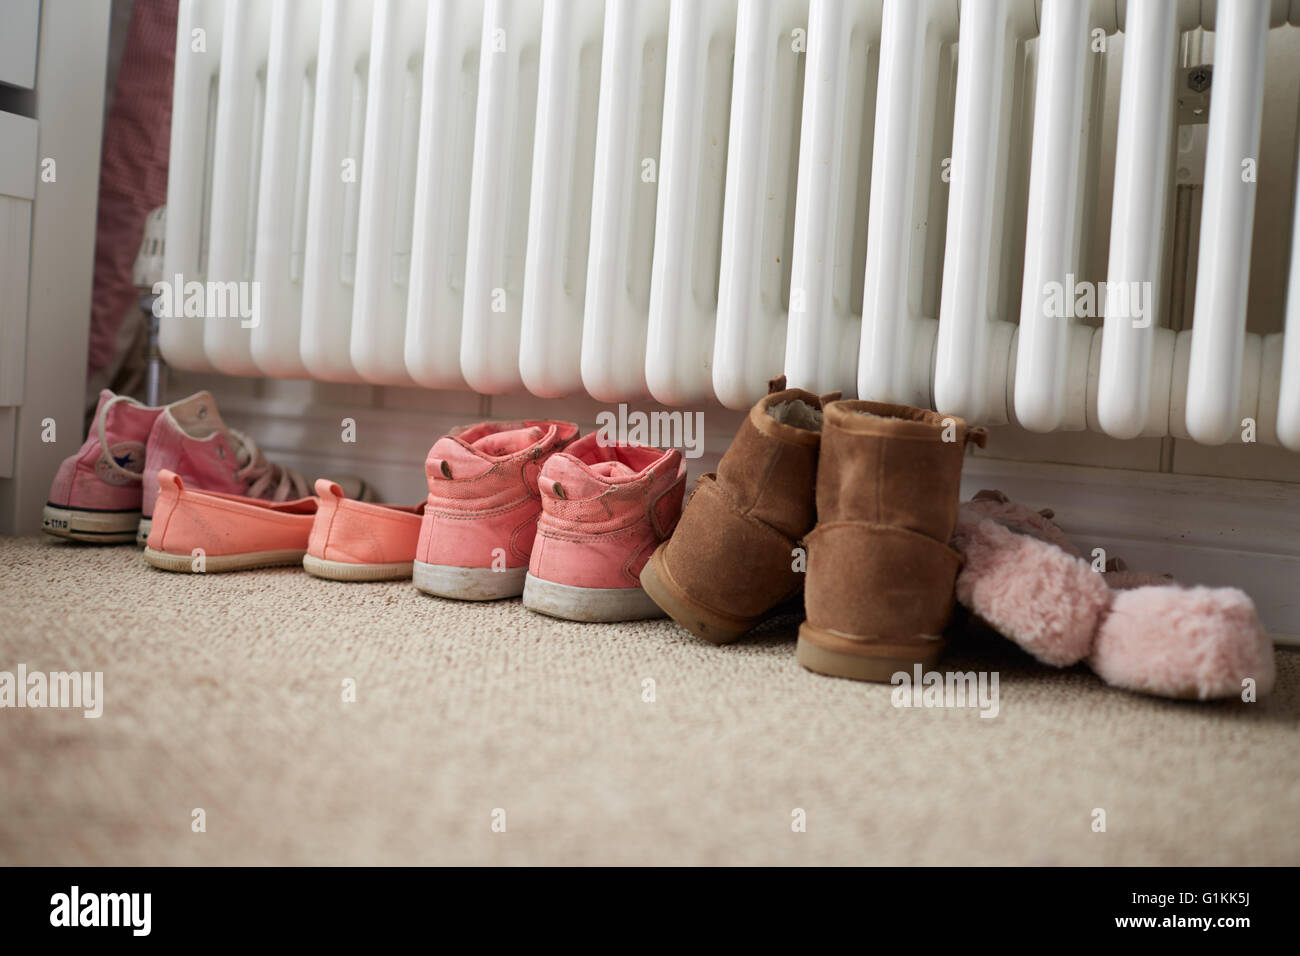 Shoes By Radiator In Family Home Stock Photo